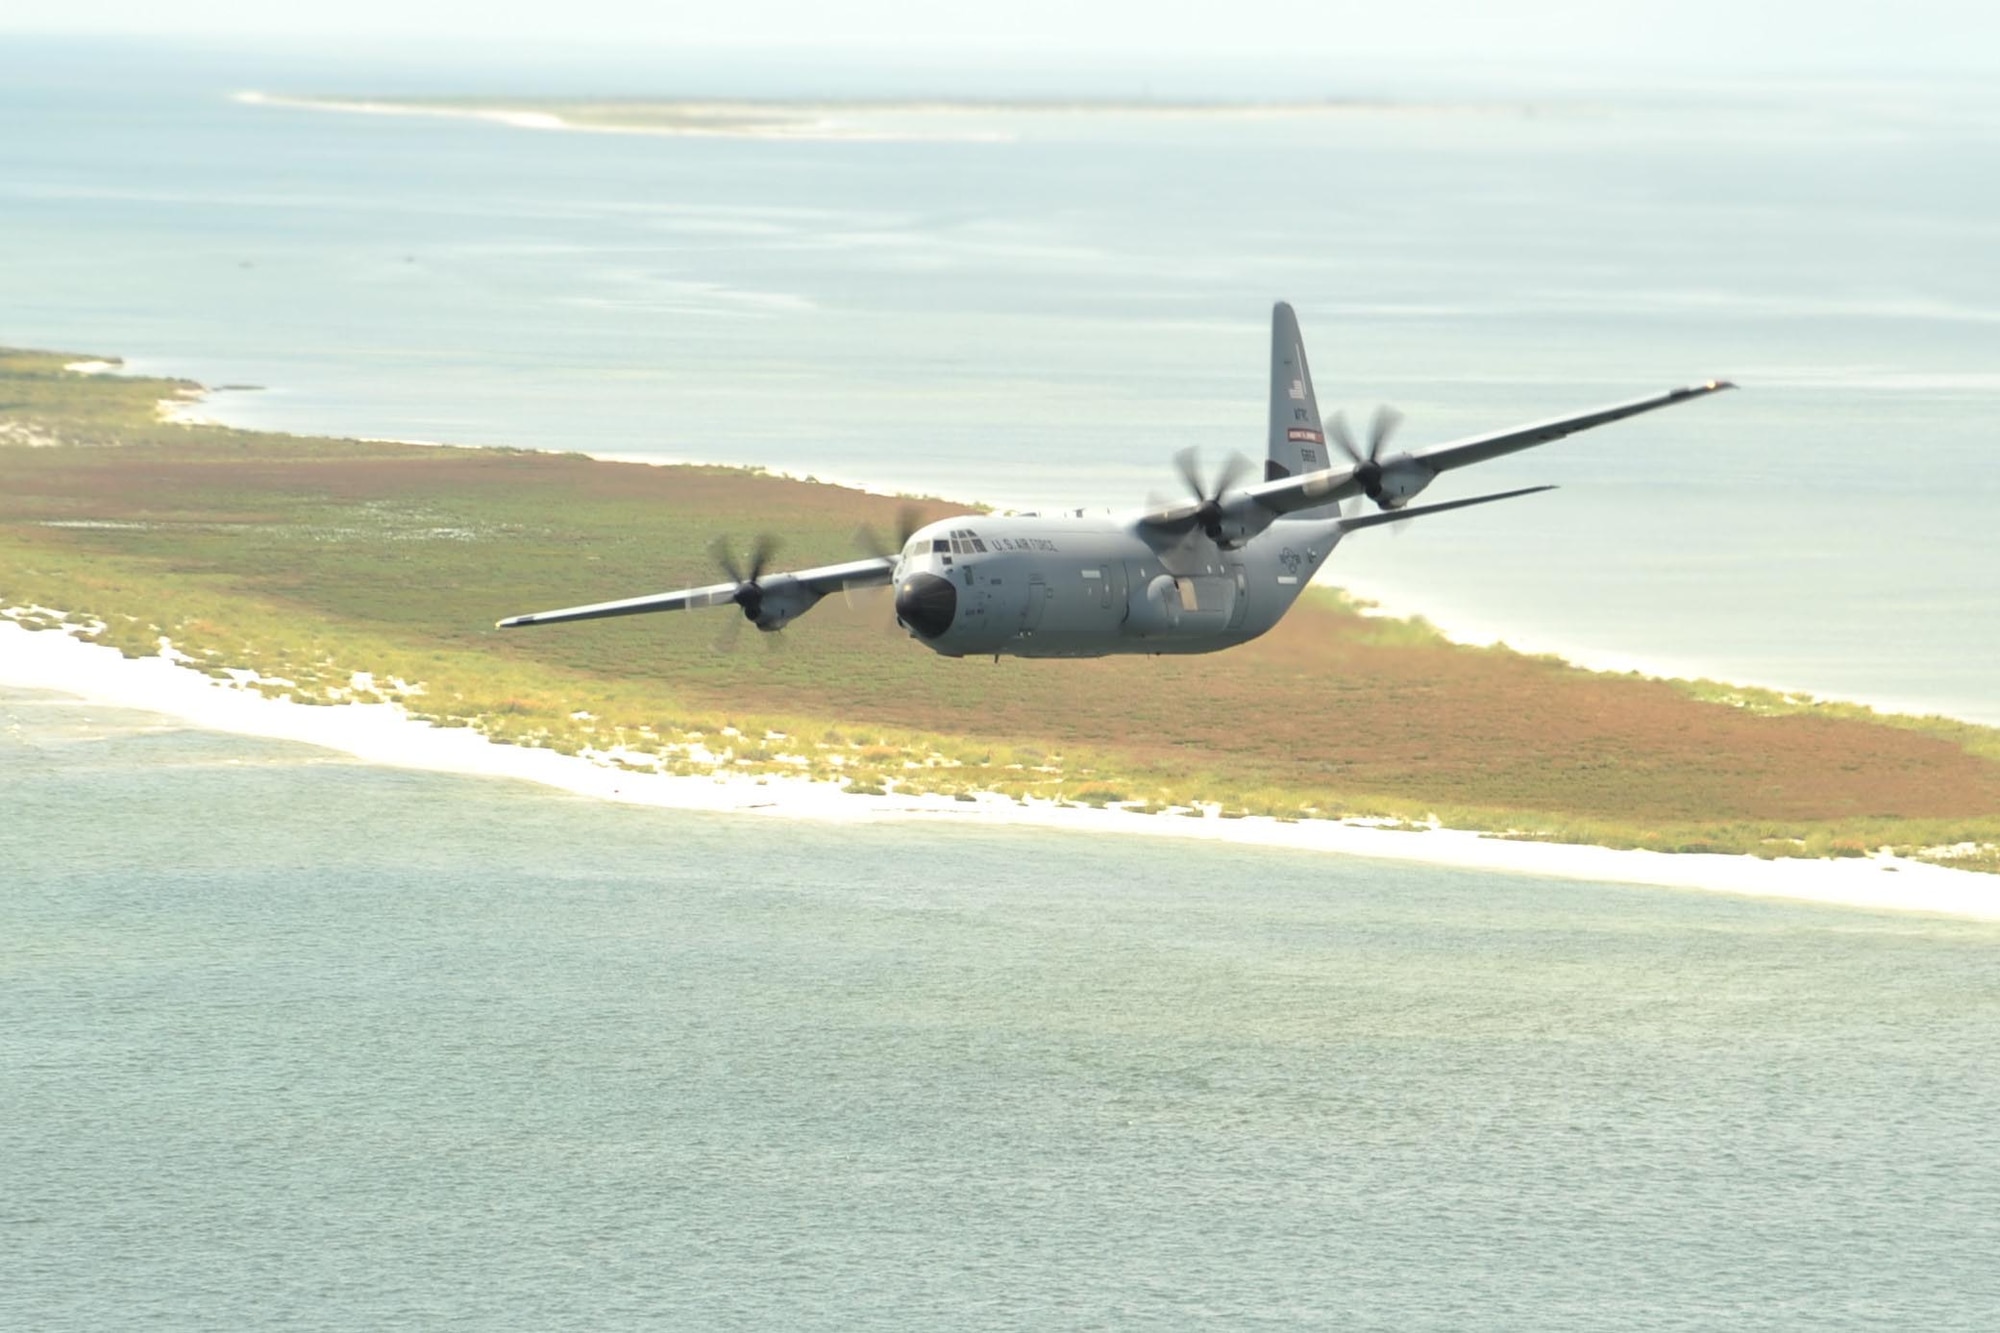 An 815th Airlift Squadron C-130J aircraft flies over the Mississippi Gulfcoast during a four-aircraft training mission Sept. 11, 2016. The aircraft took off from Keesler Air Force Base, Mississippi, and airdropped simulated cargo and heavy equipment over Stennis International Airport, Mississippi. (U.S. Air Force photo by Tech. Sgt. Ryan Labadens)